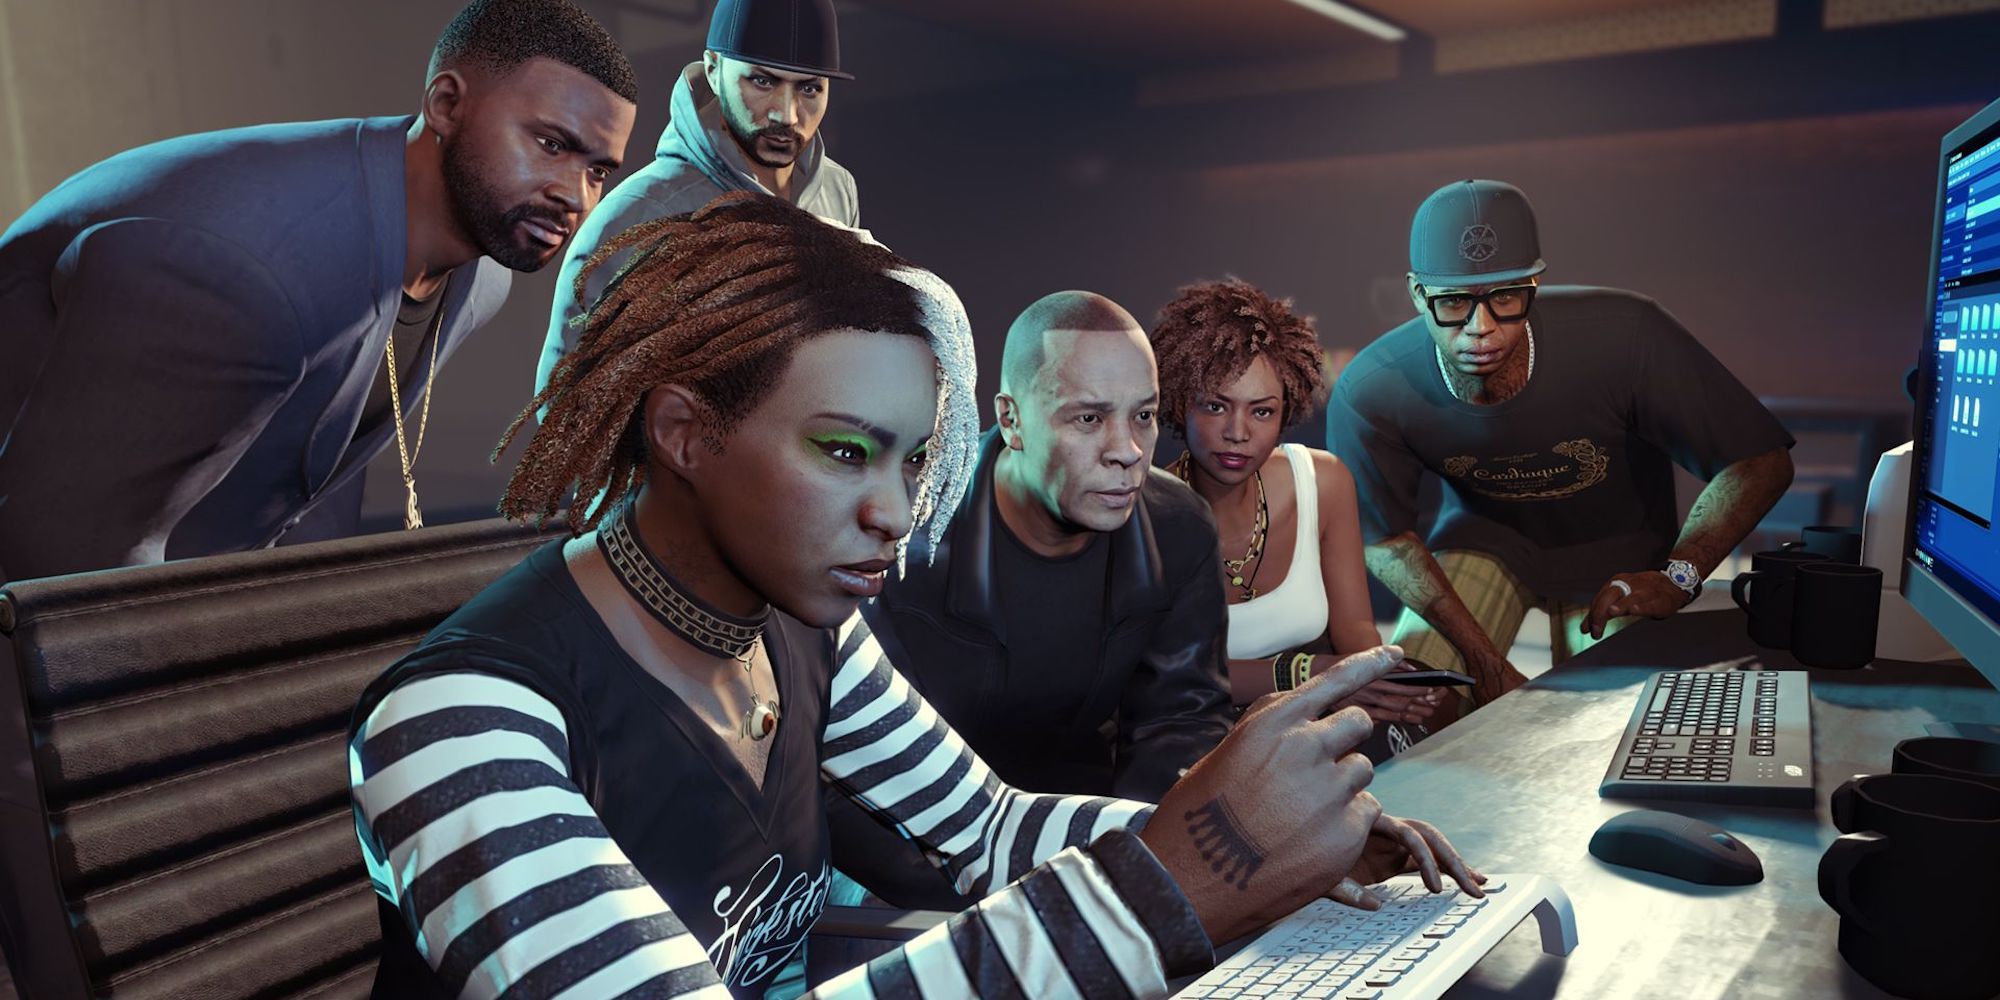 gta online the contract characters around a computer